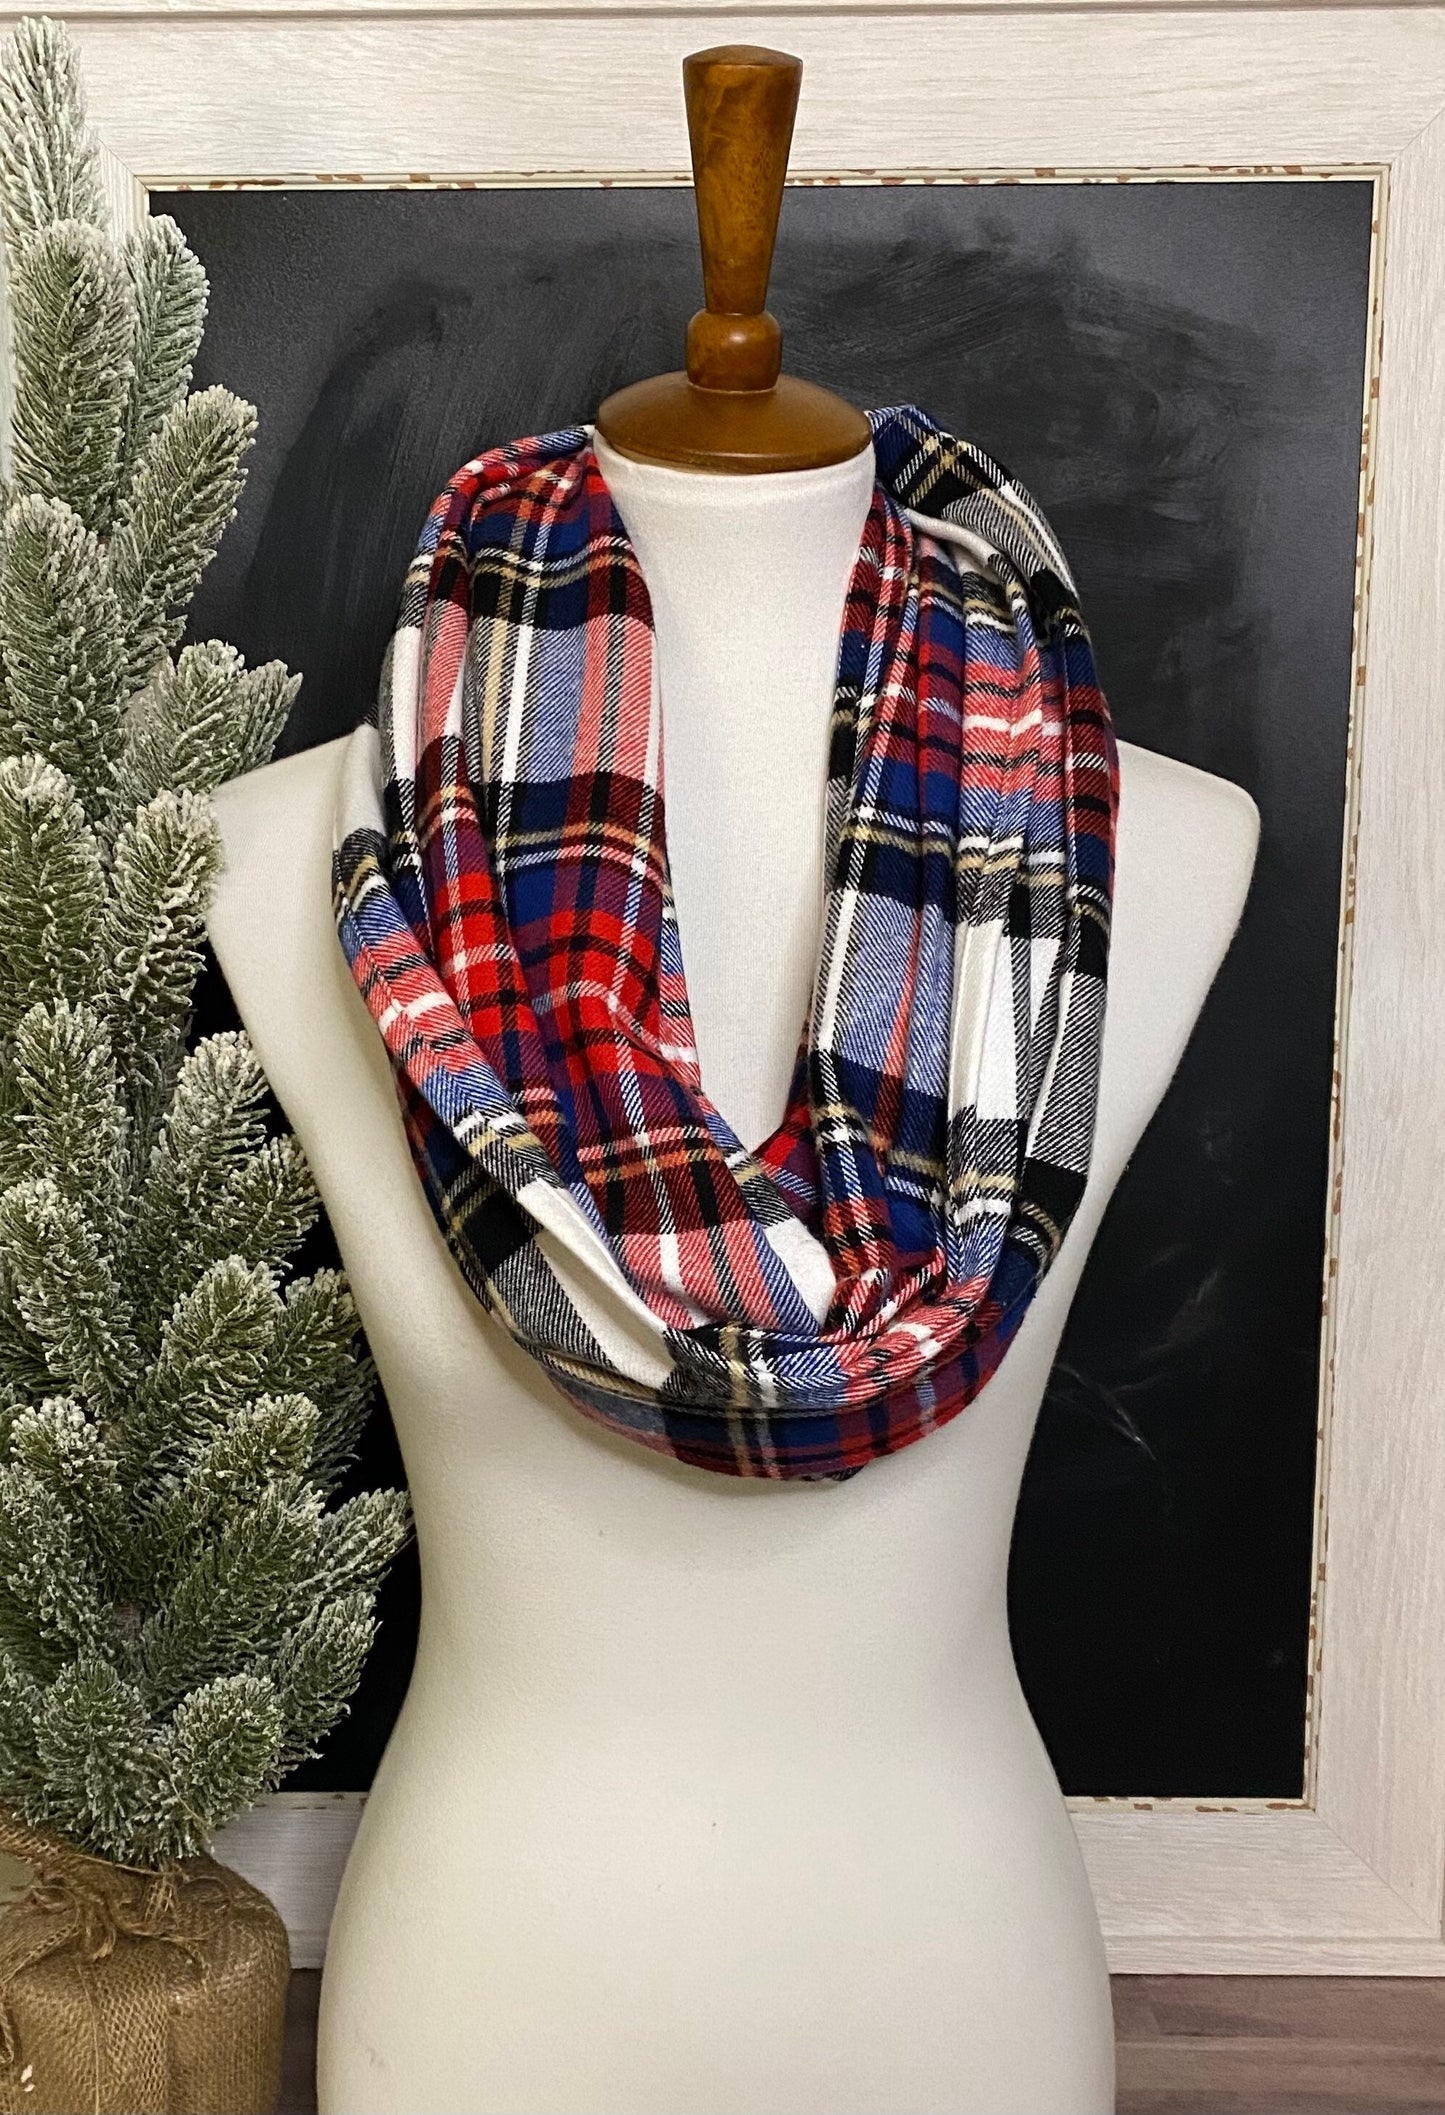 Crisp Winter Infinity Scarf, infinity scarf, winter scarf, plaid scarf, holiday gift, gift for mom, unisex gift